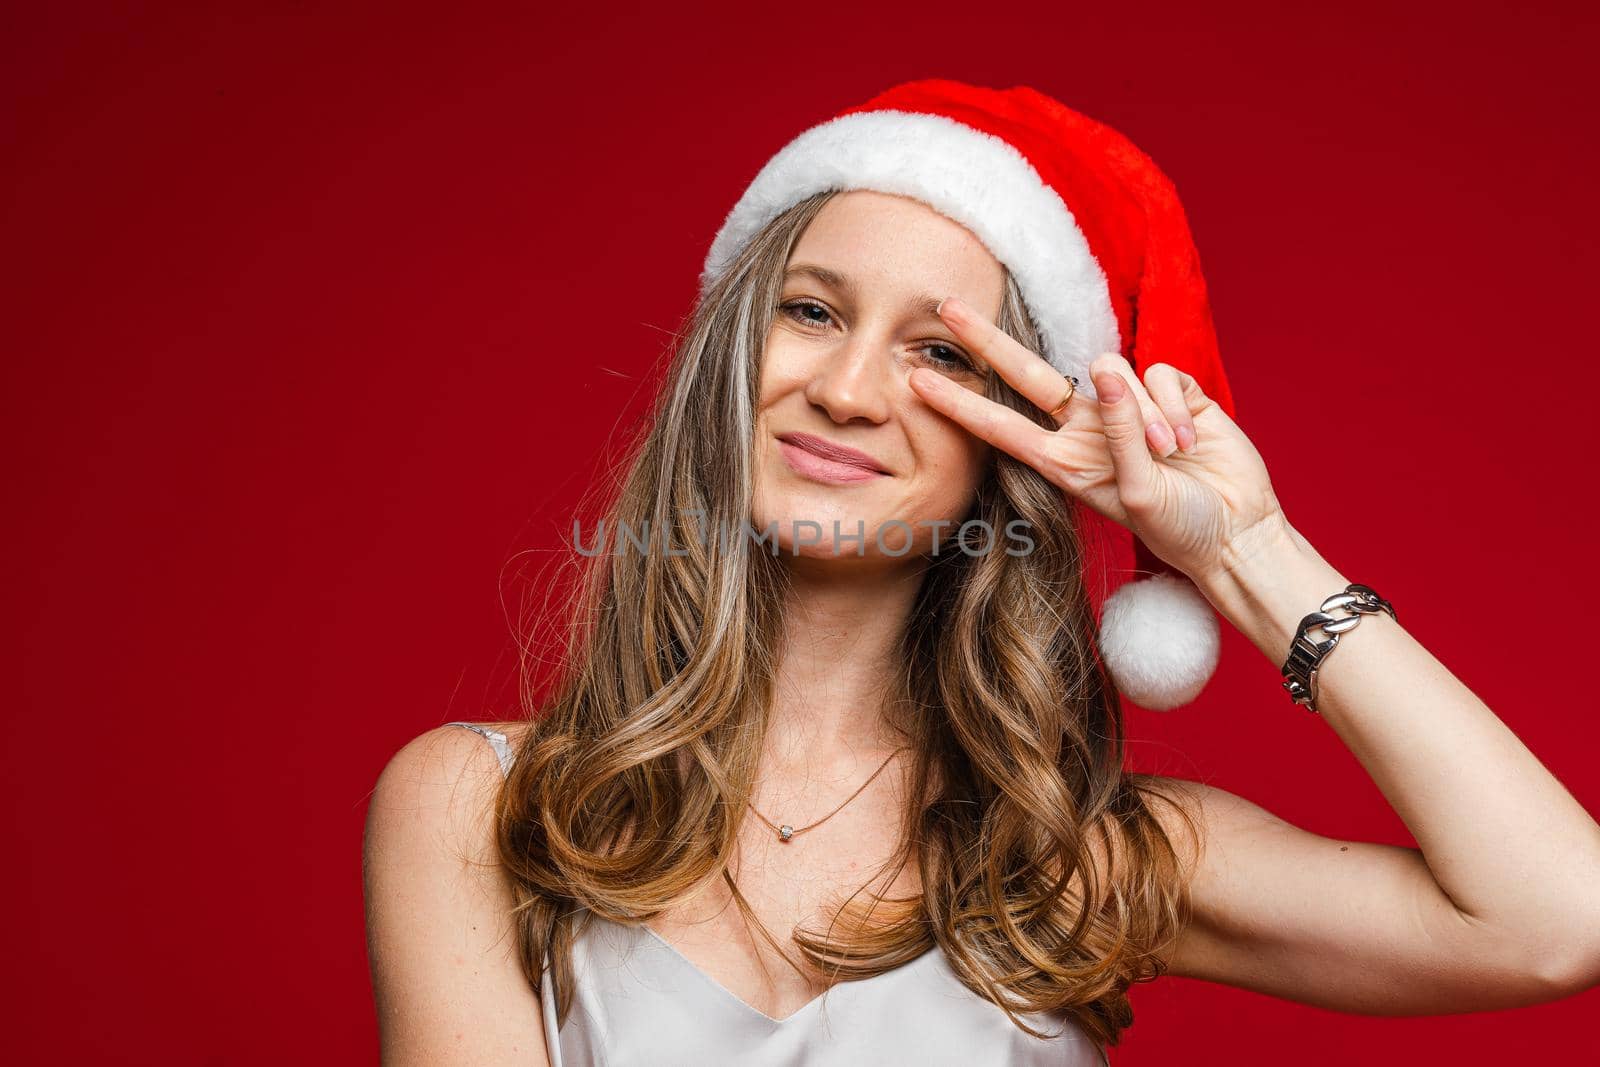 Portrait of jovial carefree girl with wavy fair hair wearing red Santa hat with white rim showing peace sign with fingers at eye and sticking her tongue out. Isolate on red.